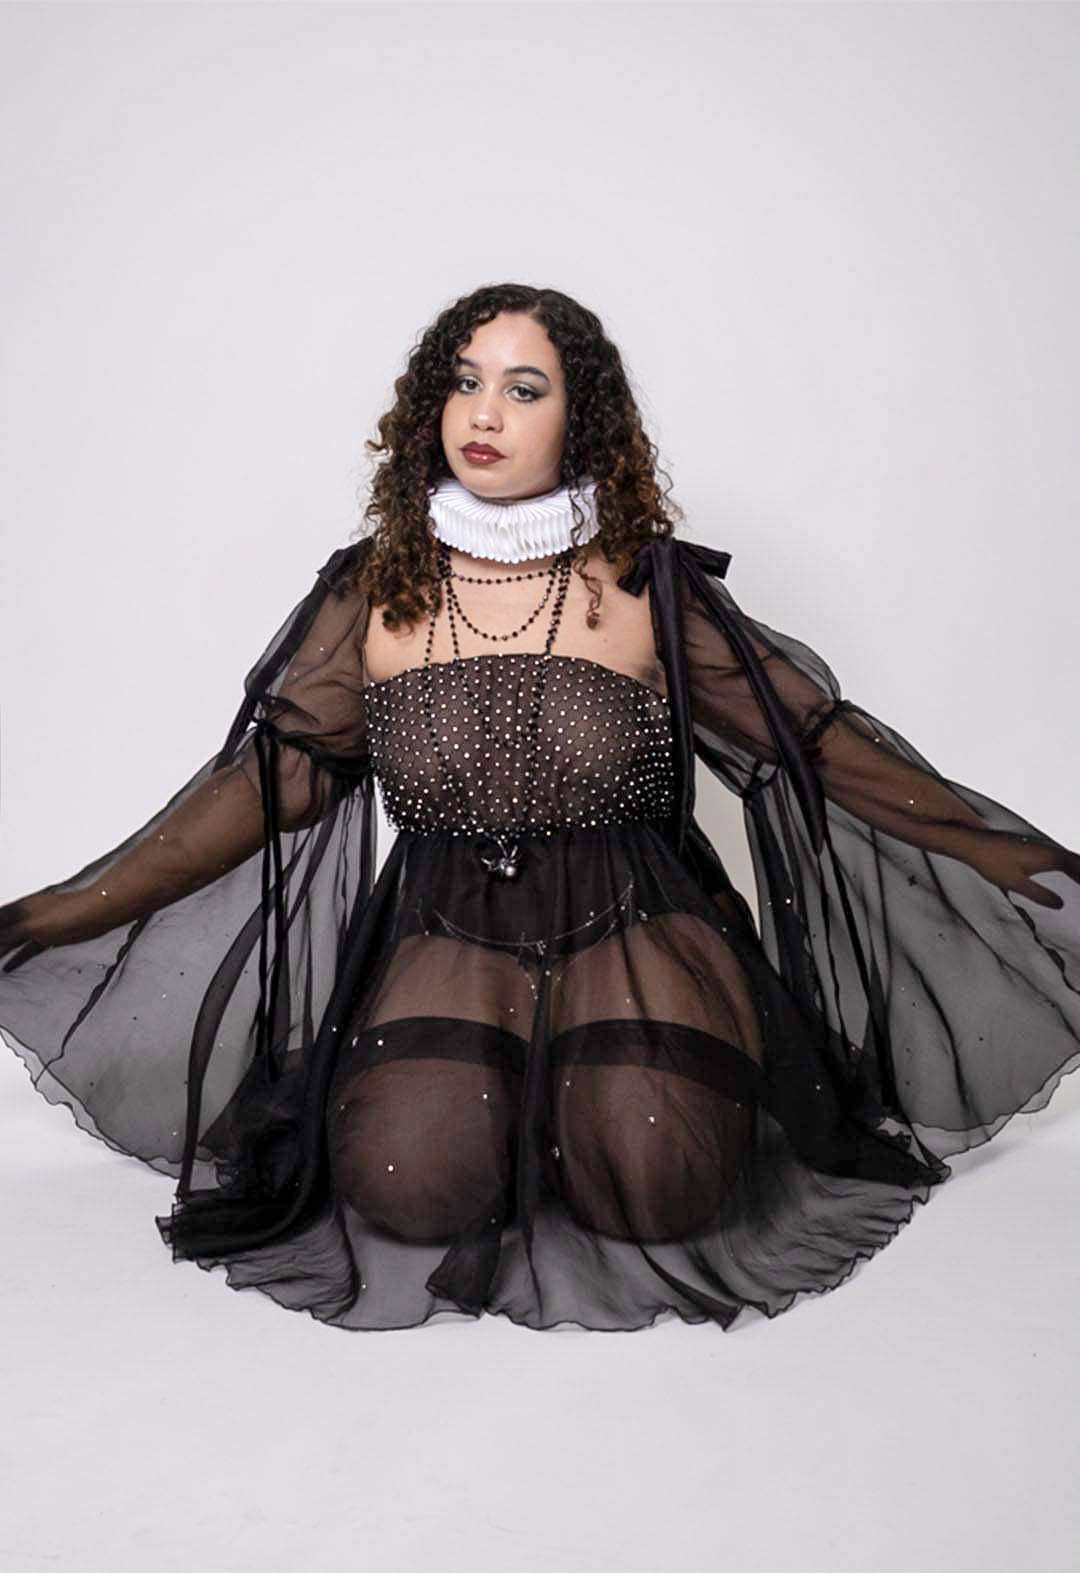 The model is sitting kneeling in a black organza babydoll dress with rhinestone netting, over a black mesh panty  with chains.